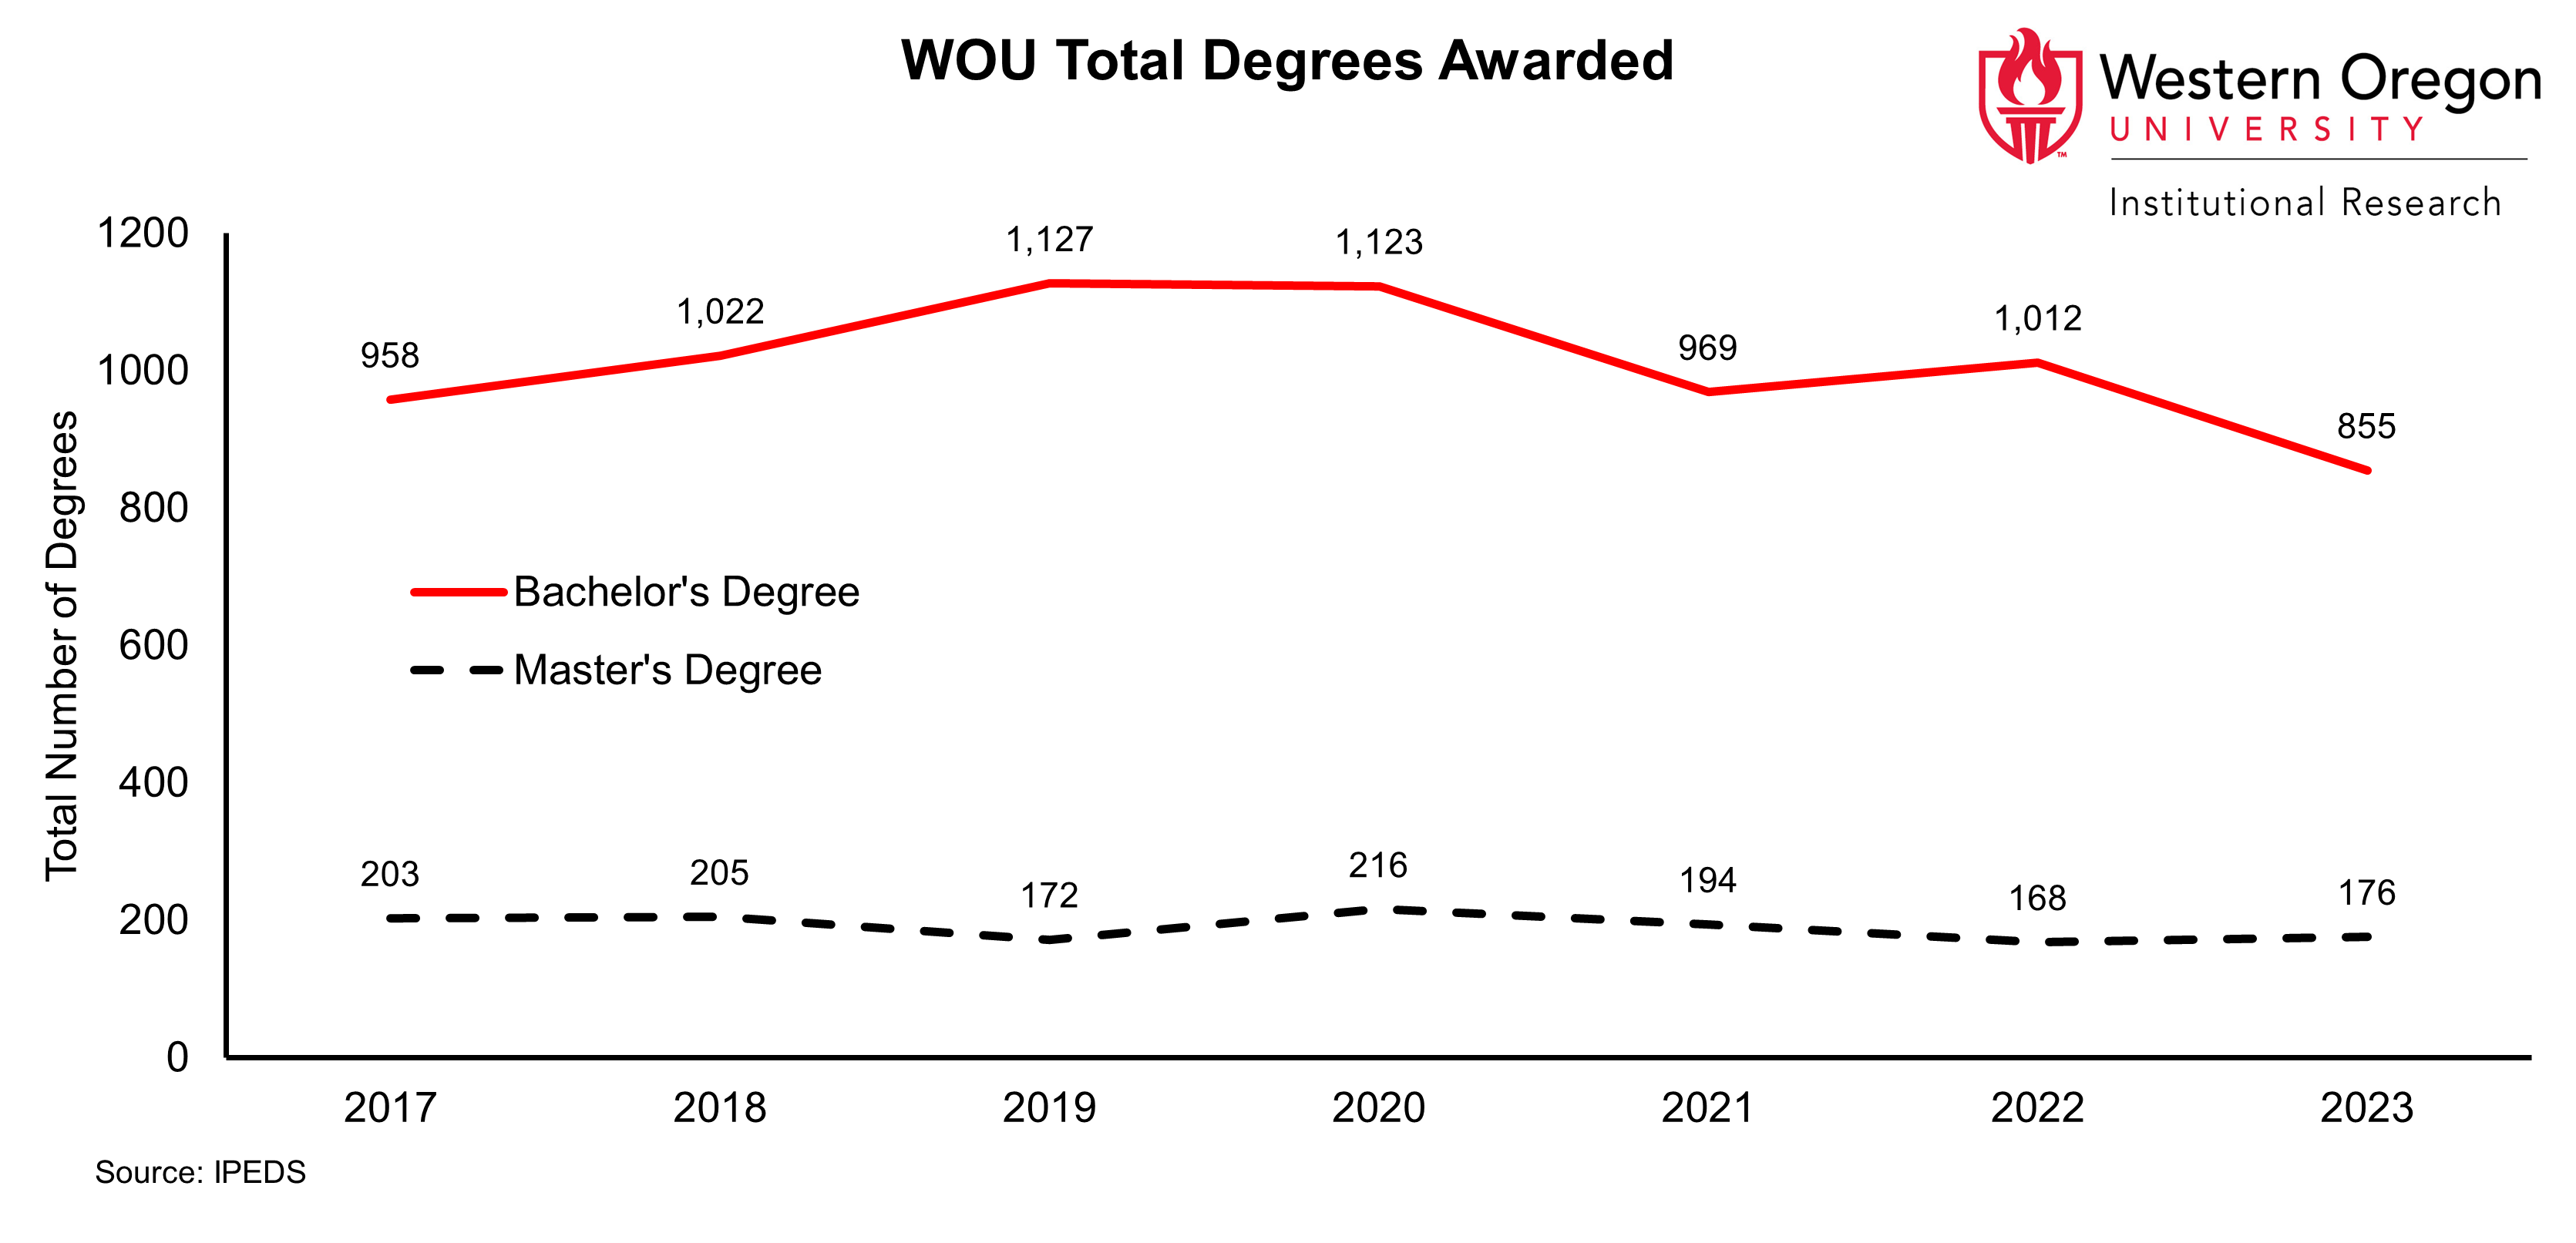 Line graph of the total number of Bachelor's and Master's degrees awarded at WOU between 2017 and 2023.